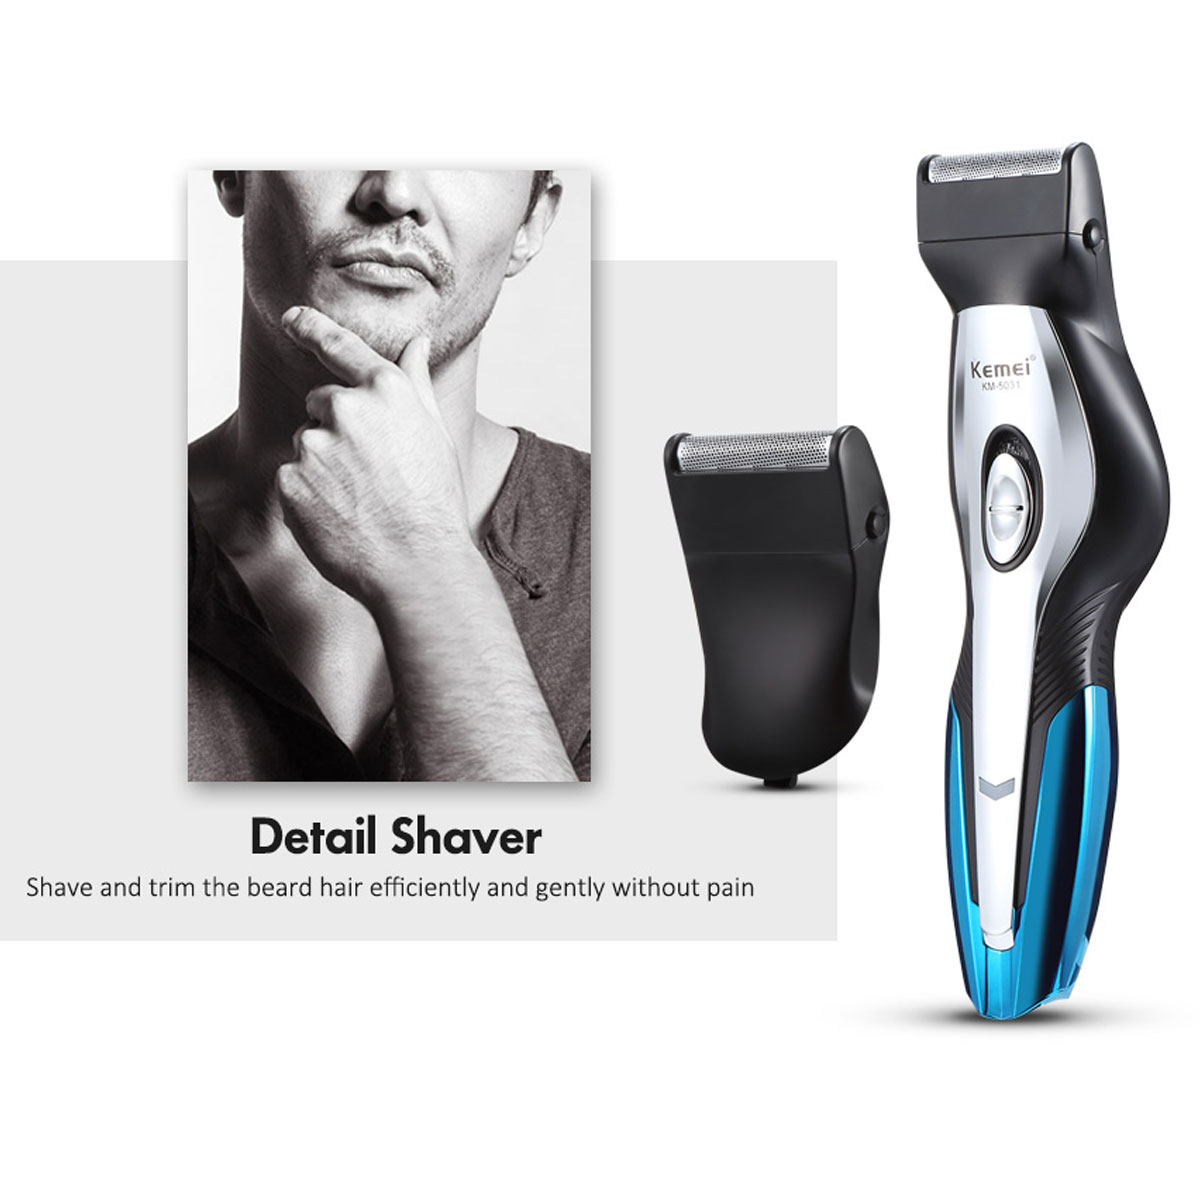 100-240V-Cordless-USB-Rechargeable-Hair-Clipper-Trimmers-Hair-Cutting-Kit-1421485